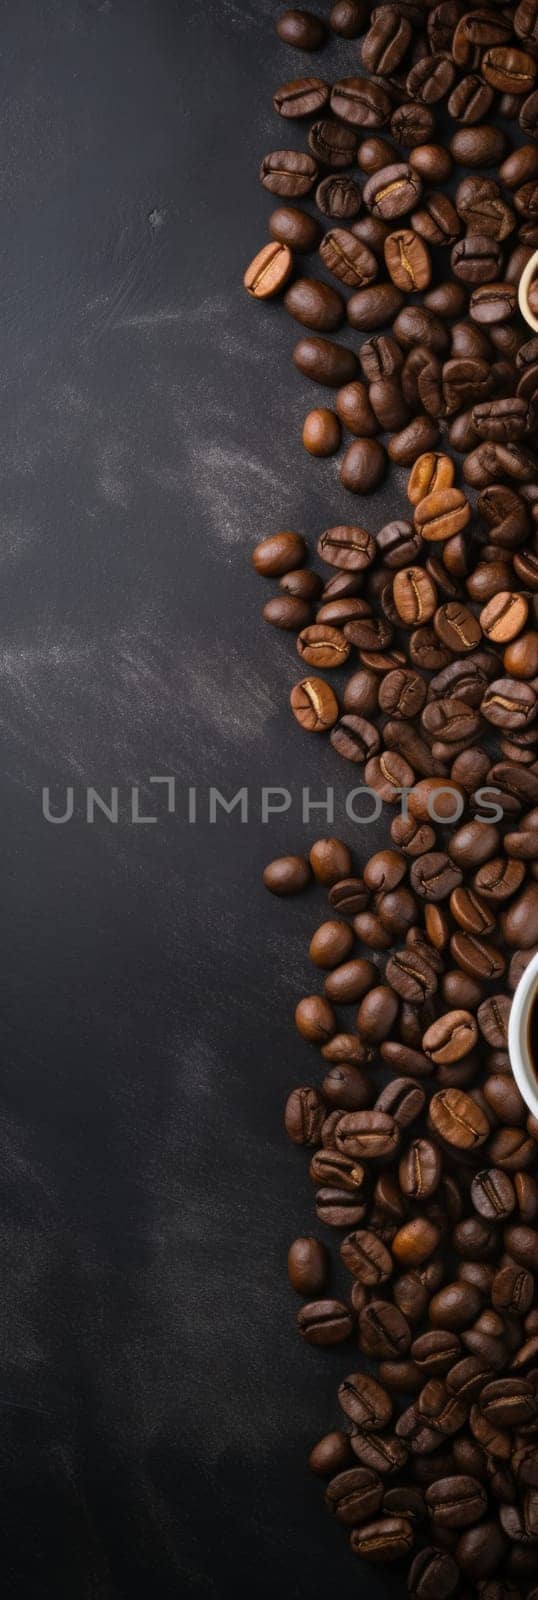 A cup of coffee and a spoon are sitting on top of beans, AI by starush